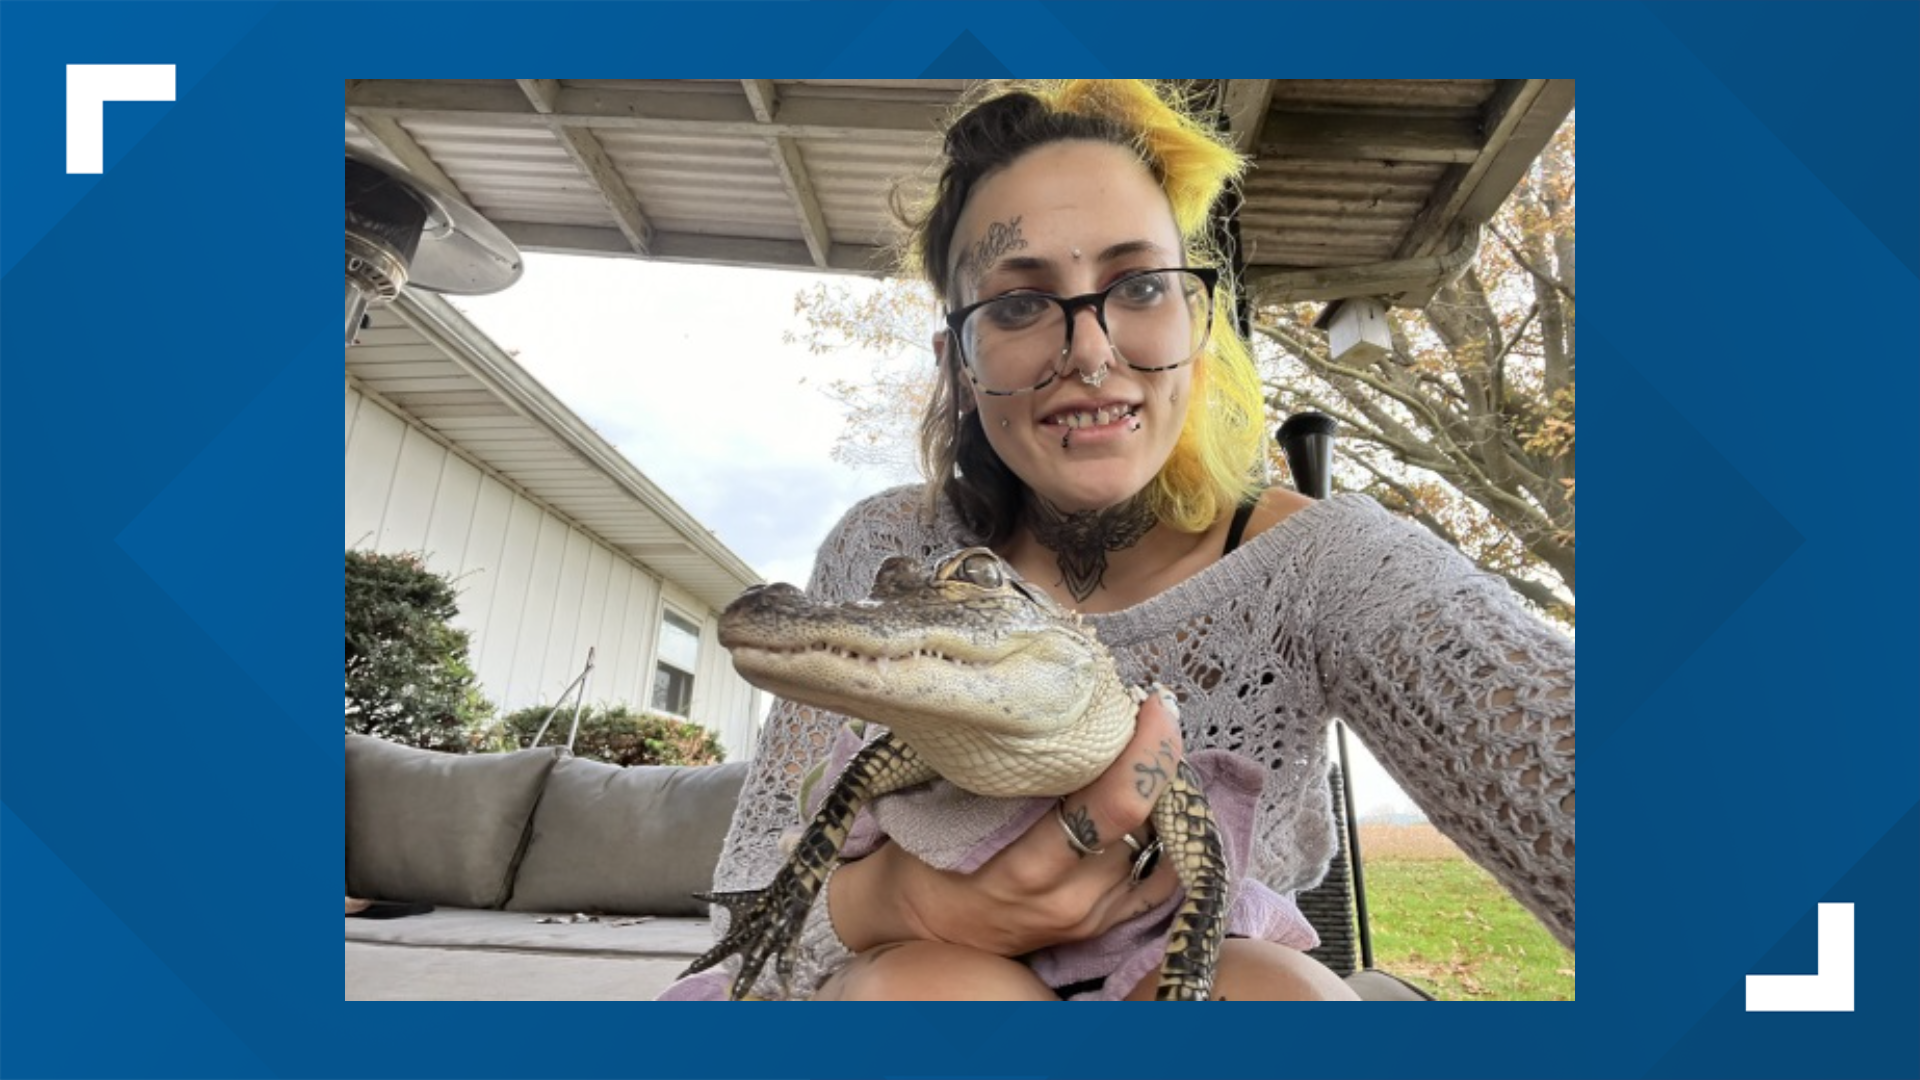 Brandy and Erik Gwynn posted on Facebook that their pet alligators, Cleo and Georgia, were allegedly stolen over the weekend from their enclosure.